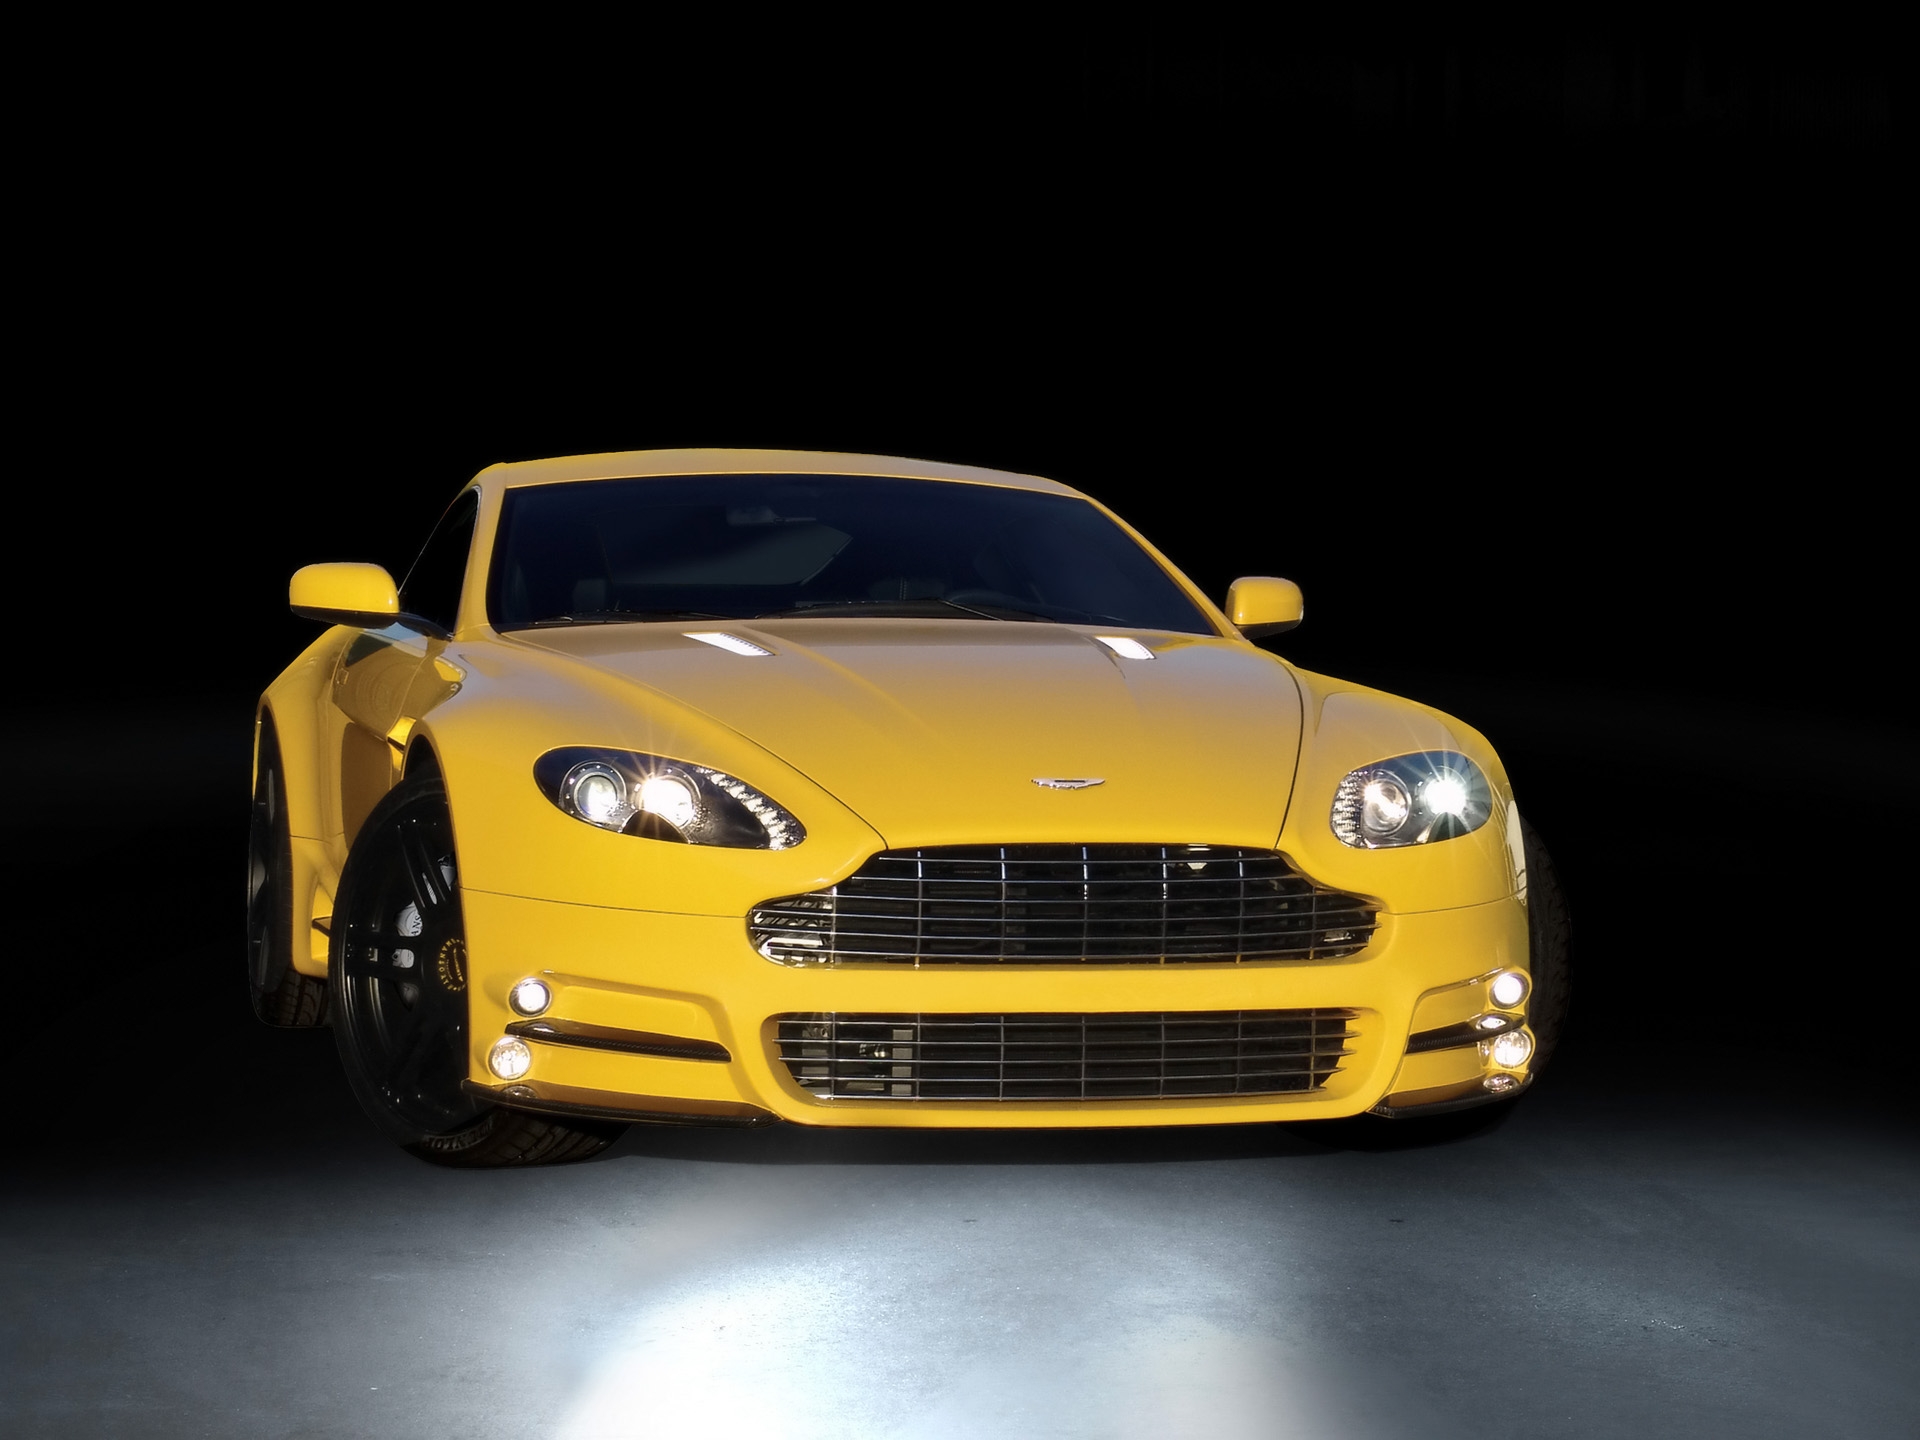 cars, sports, aston martin, yellow, front view, style, v8, vantage, mansory